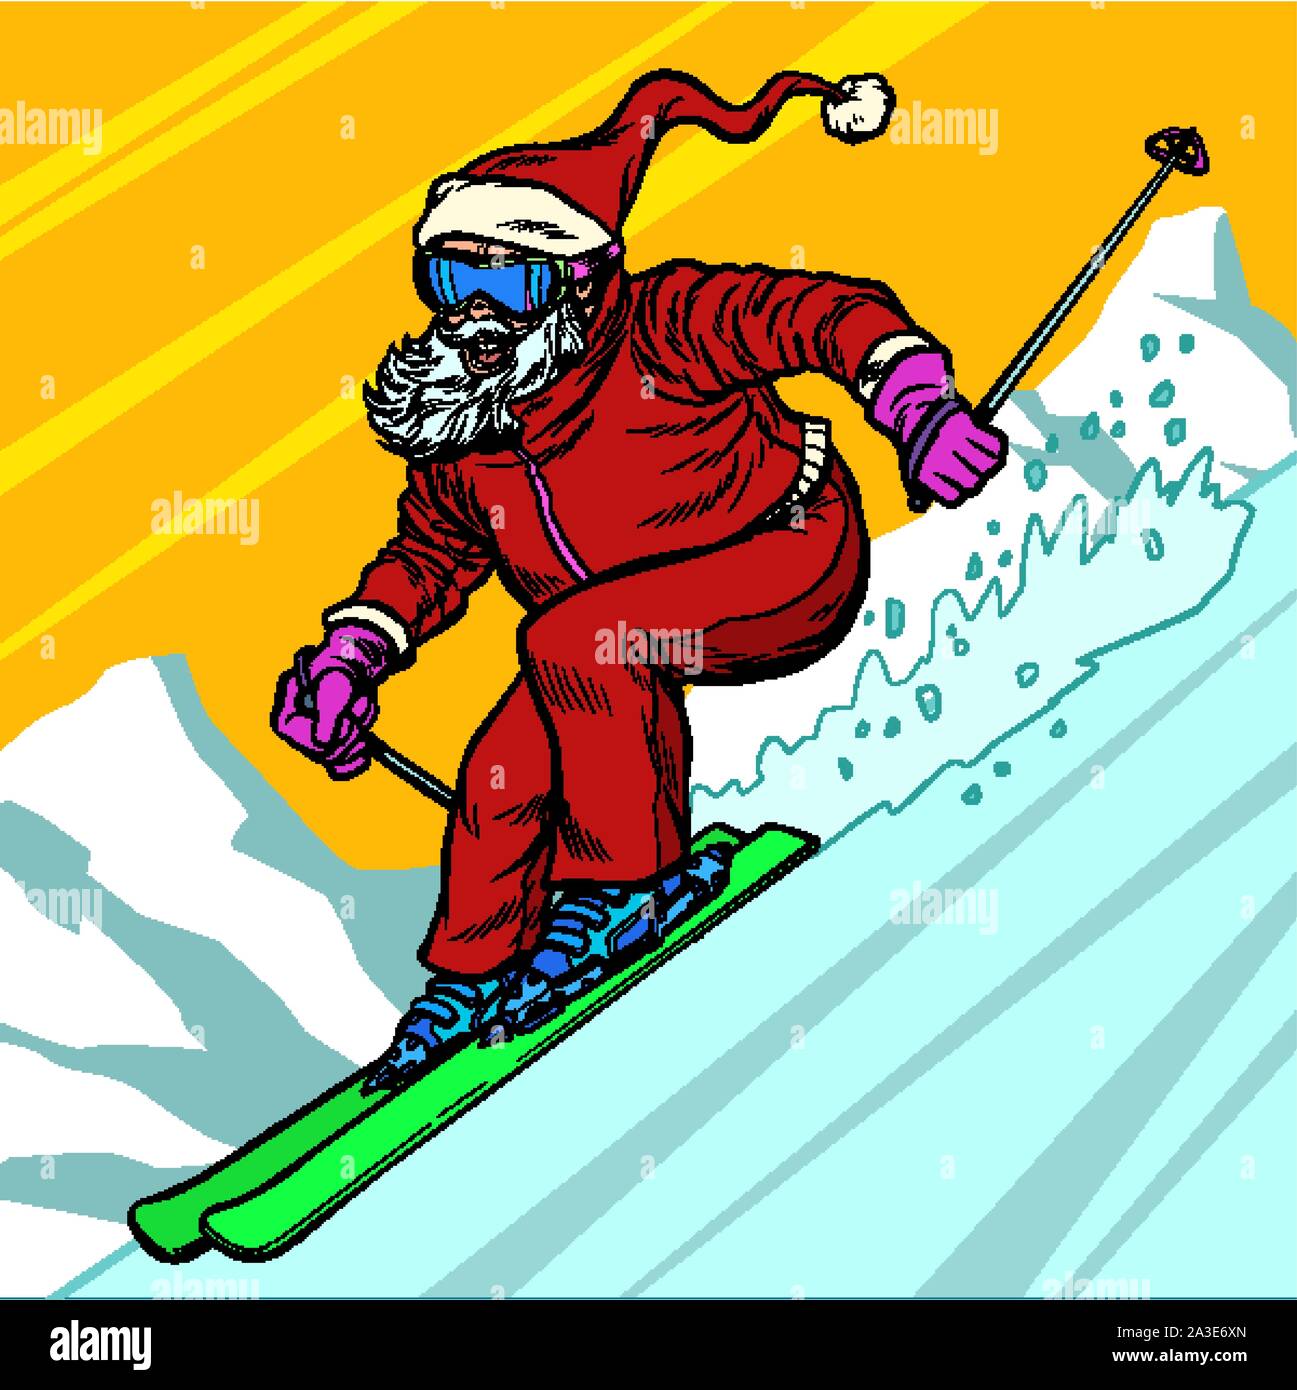 Skier day rides from the mountain Santa Claus character merry Christmas and happy new year. Pop art retro vector illustration vintage kitsch drawing 5 Stock Vector